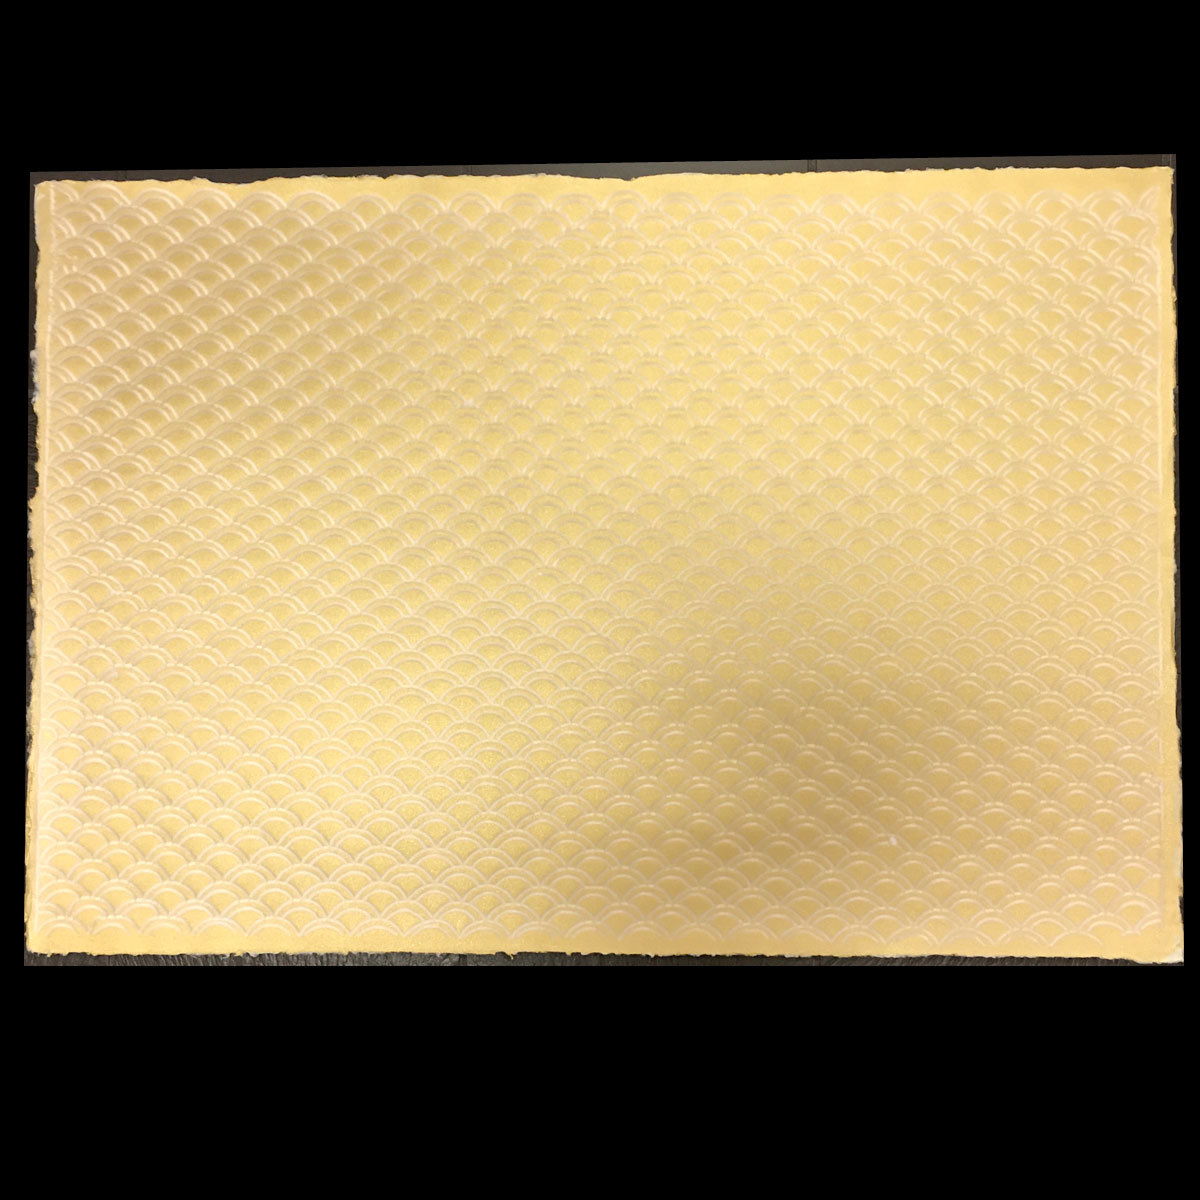  gold wave tradition pattern fine art paper hand .. Japanese paper gold color Gold large size approximately 63x93cm